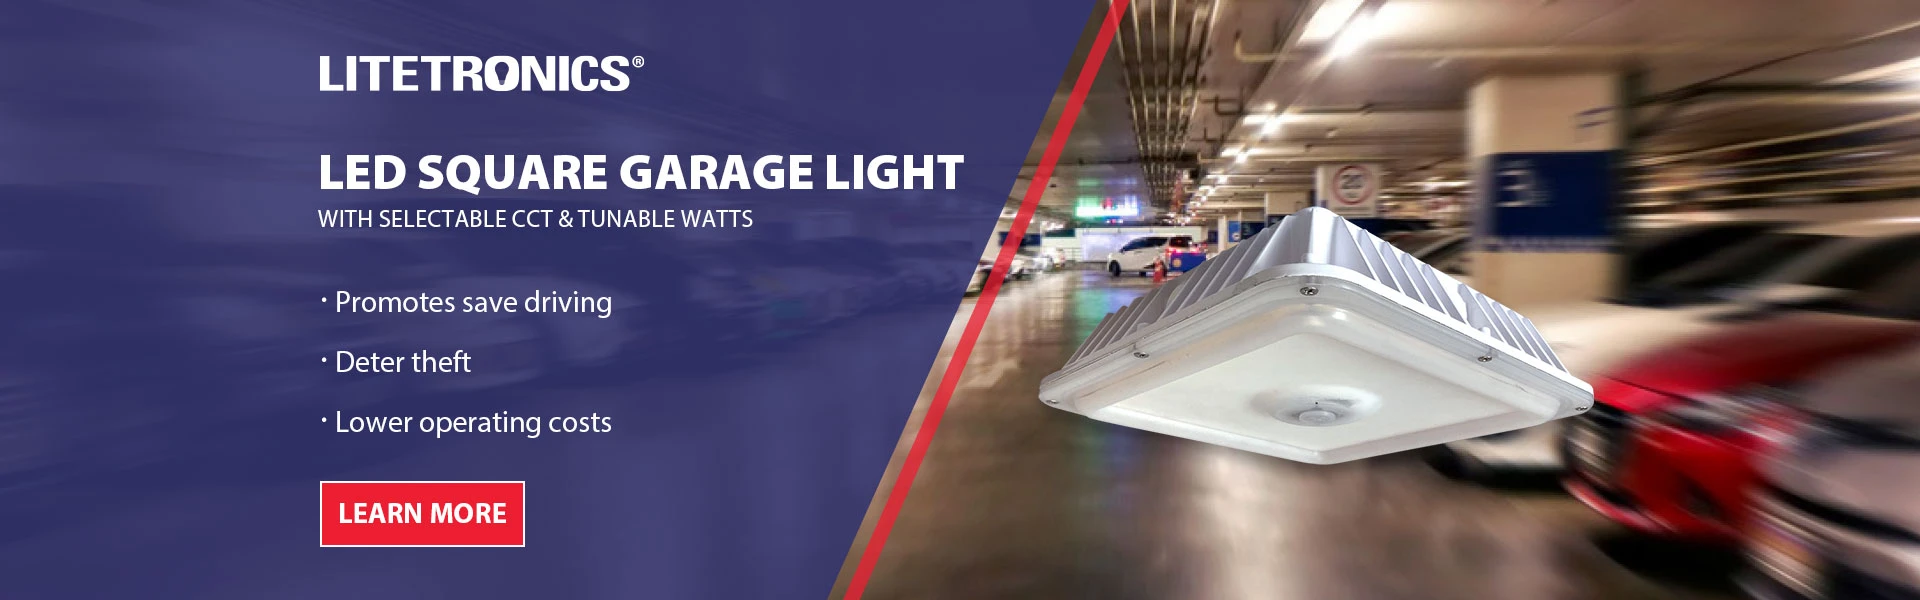 LED Square Garage Light - with selectable and tunable watts.